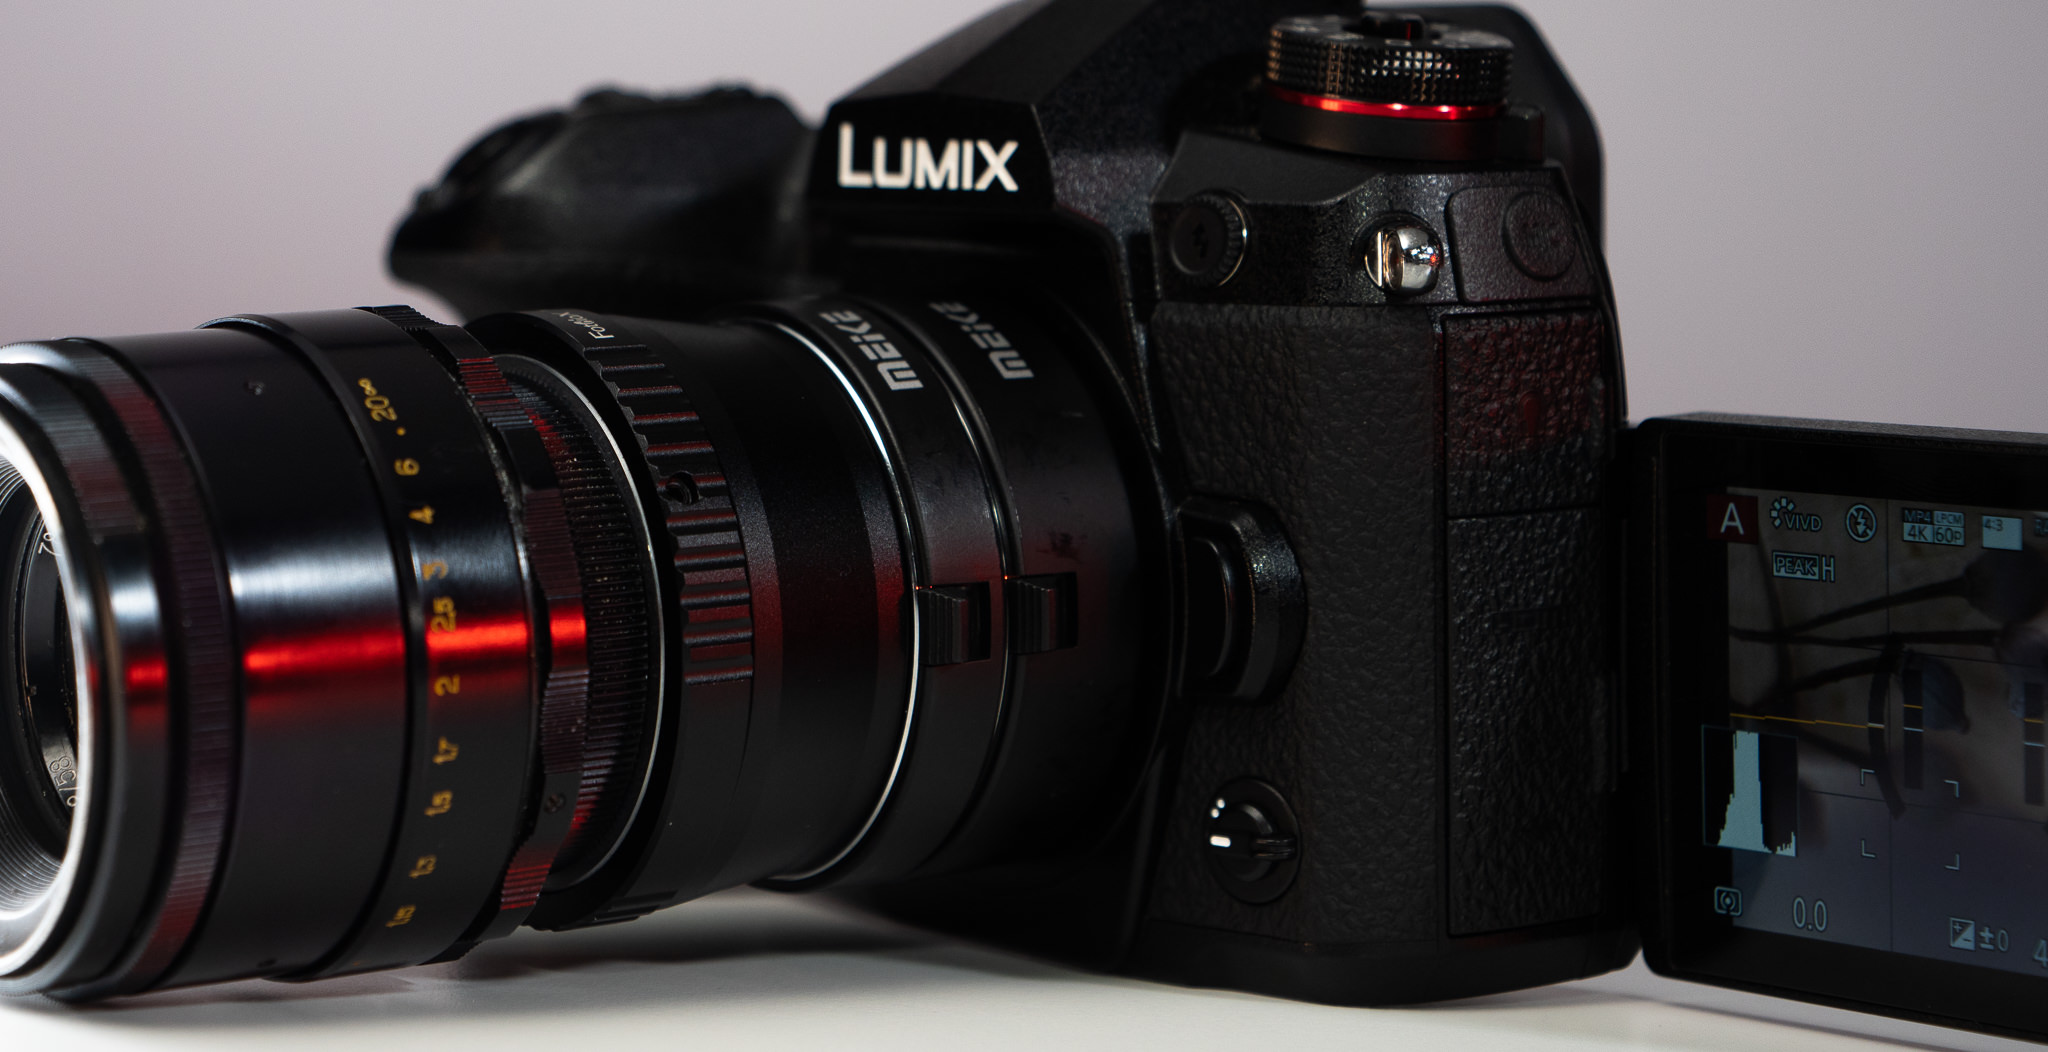 LUMIX G9 with Helios lens and MEIKE macro extension tubes